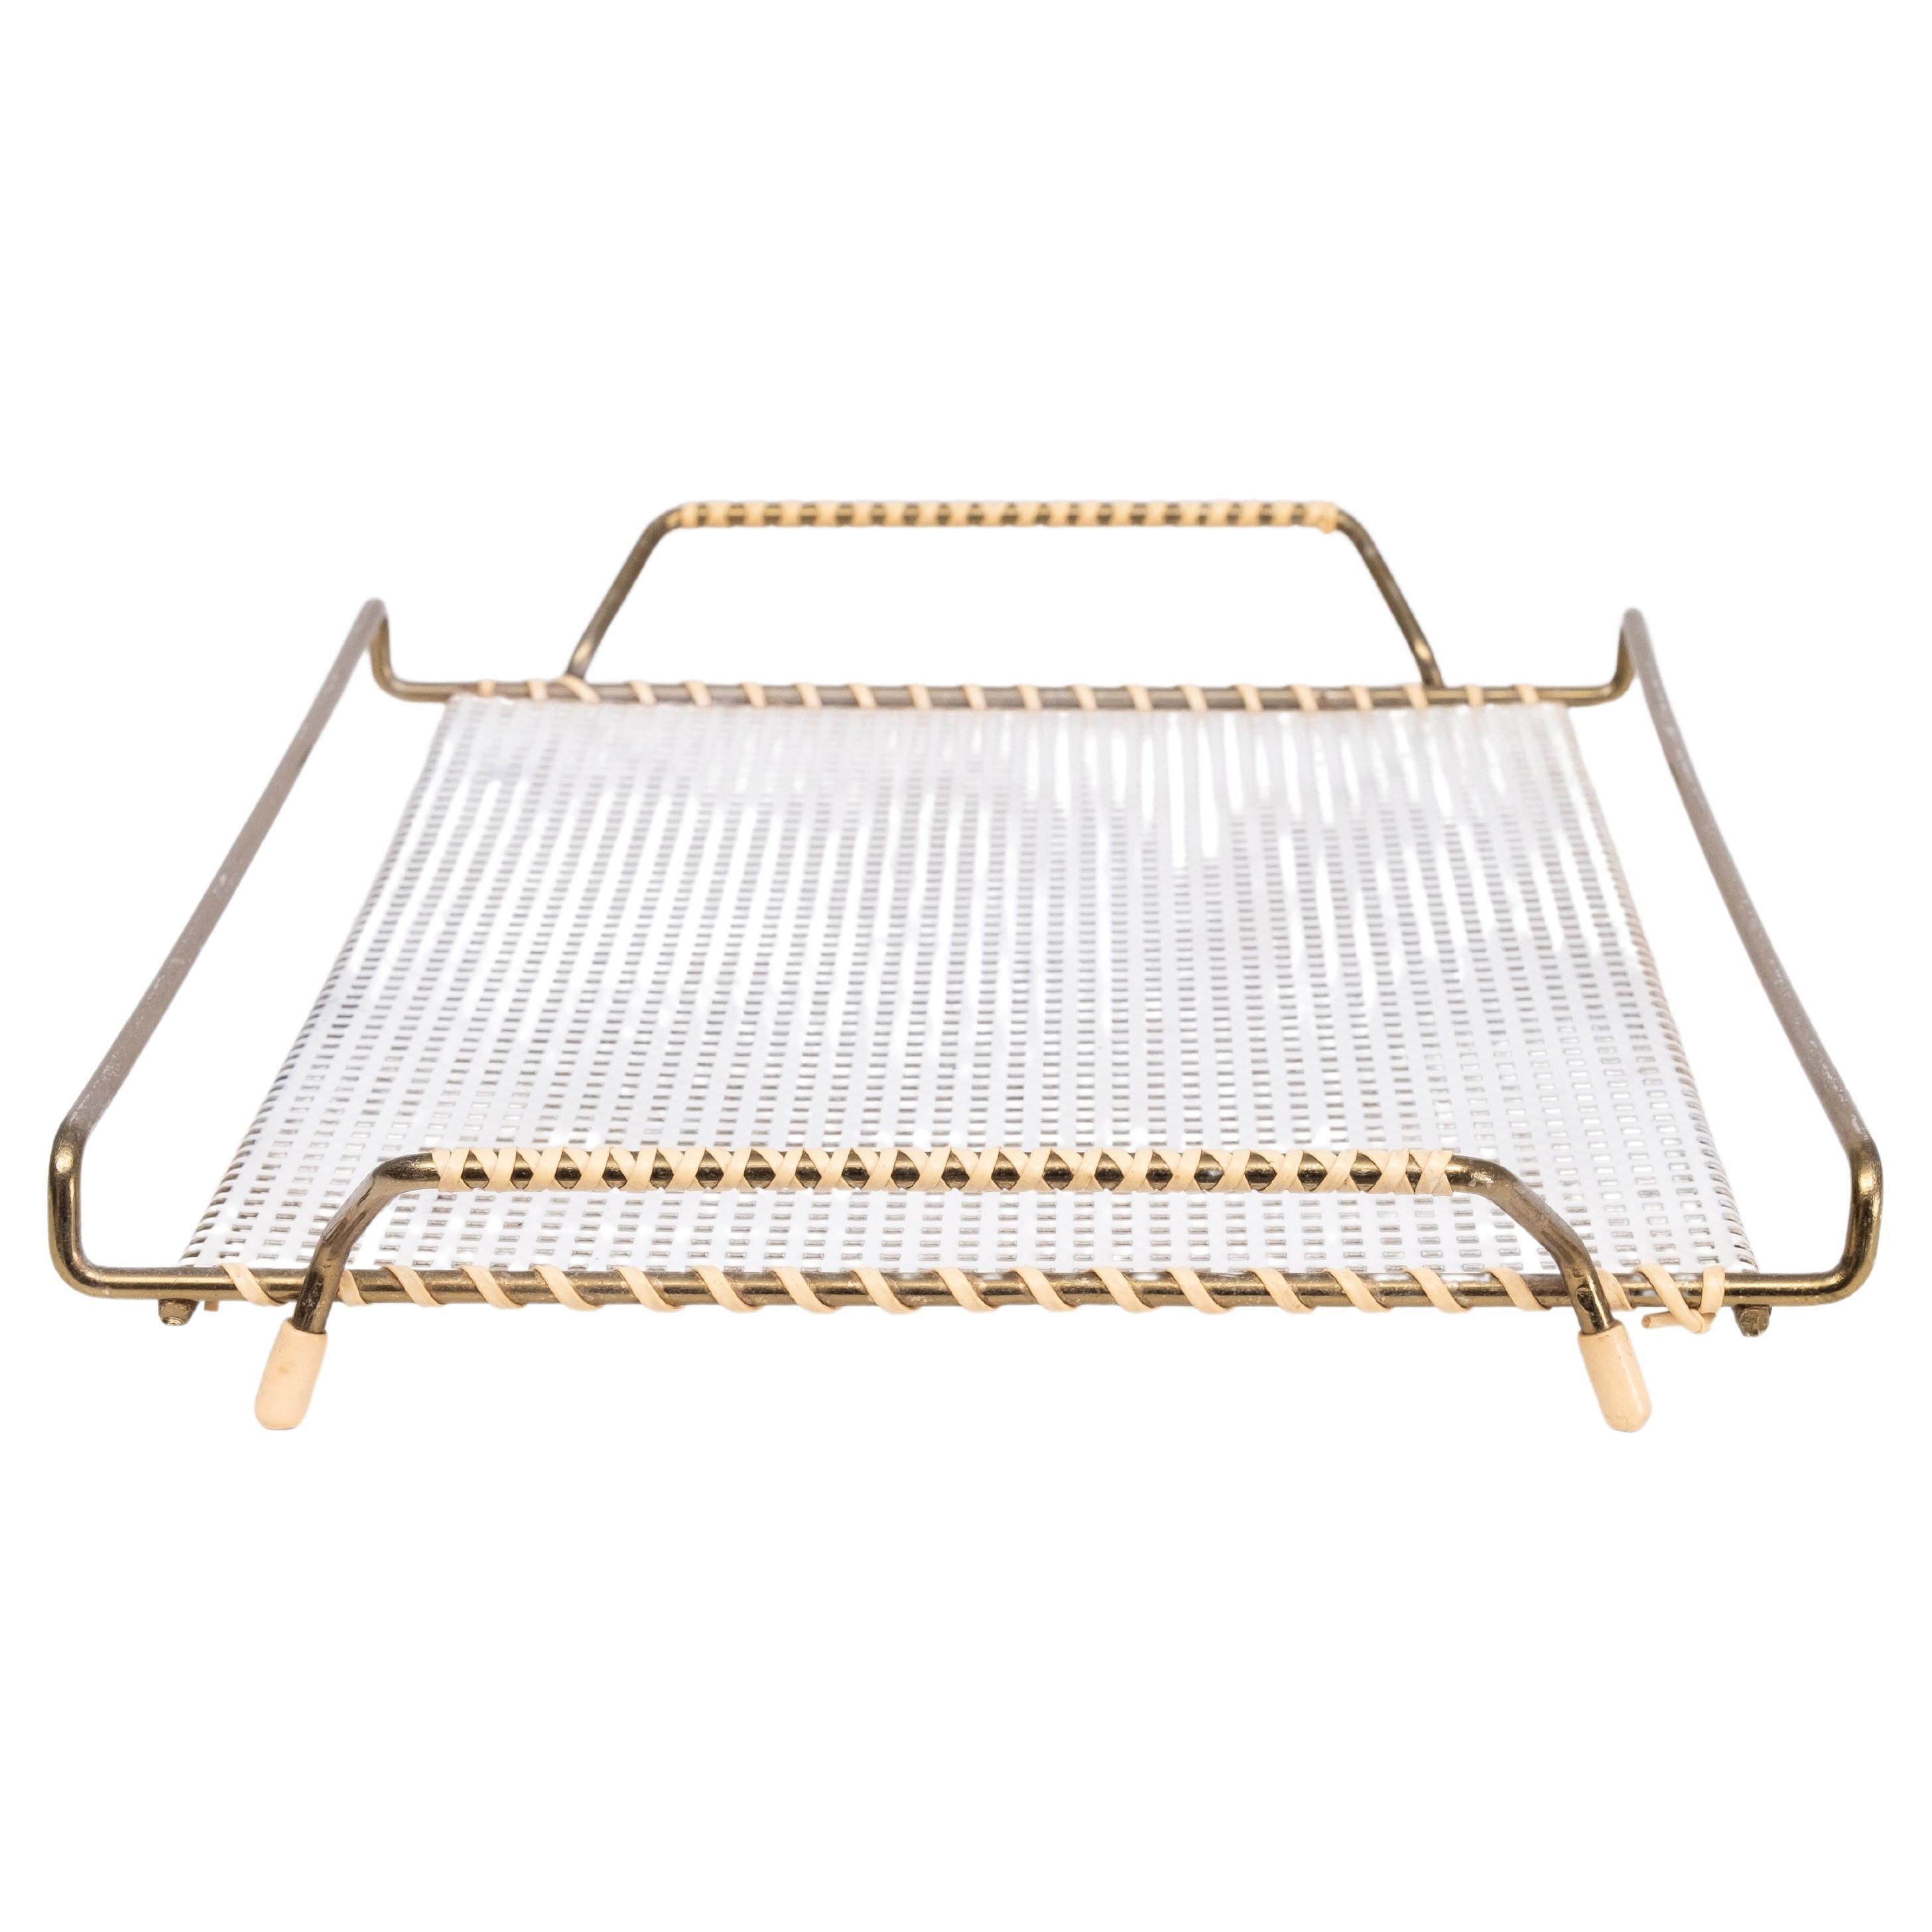 Very nice perforated metal serving tray . Brass frame .
standing on little feet . Still all complete . good condition . 
